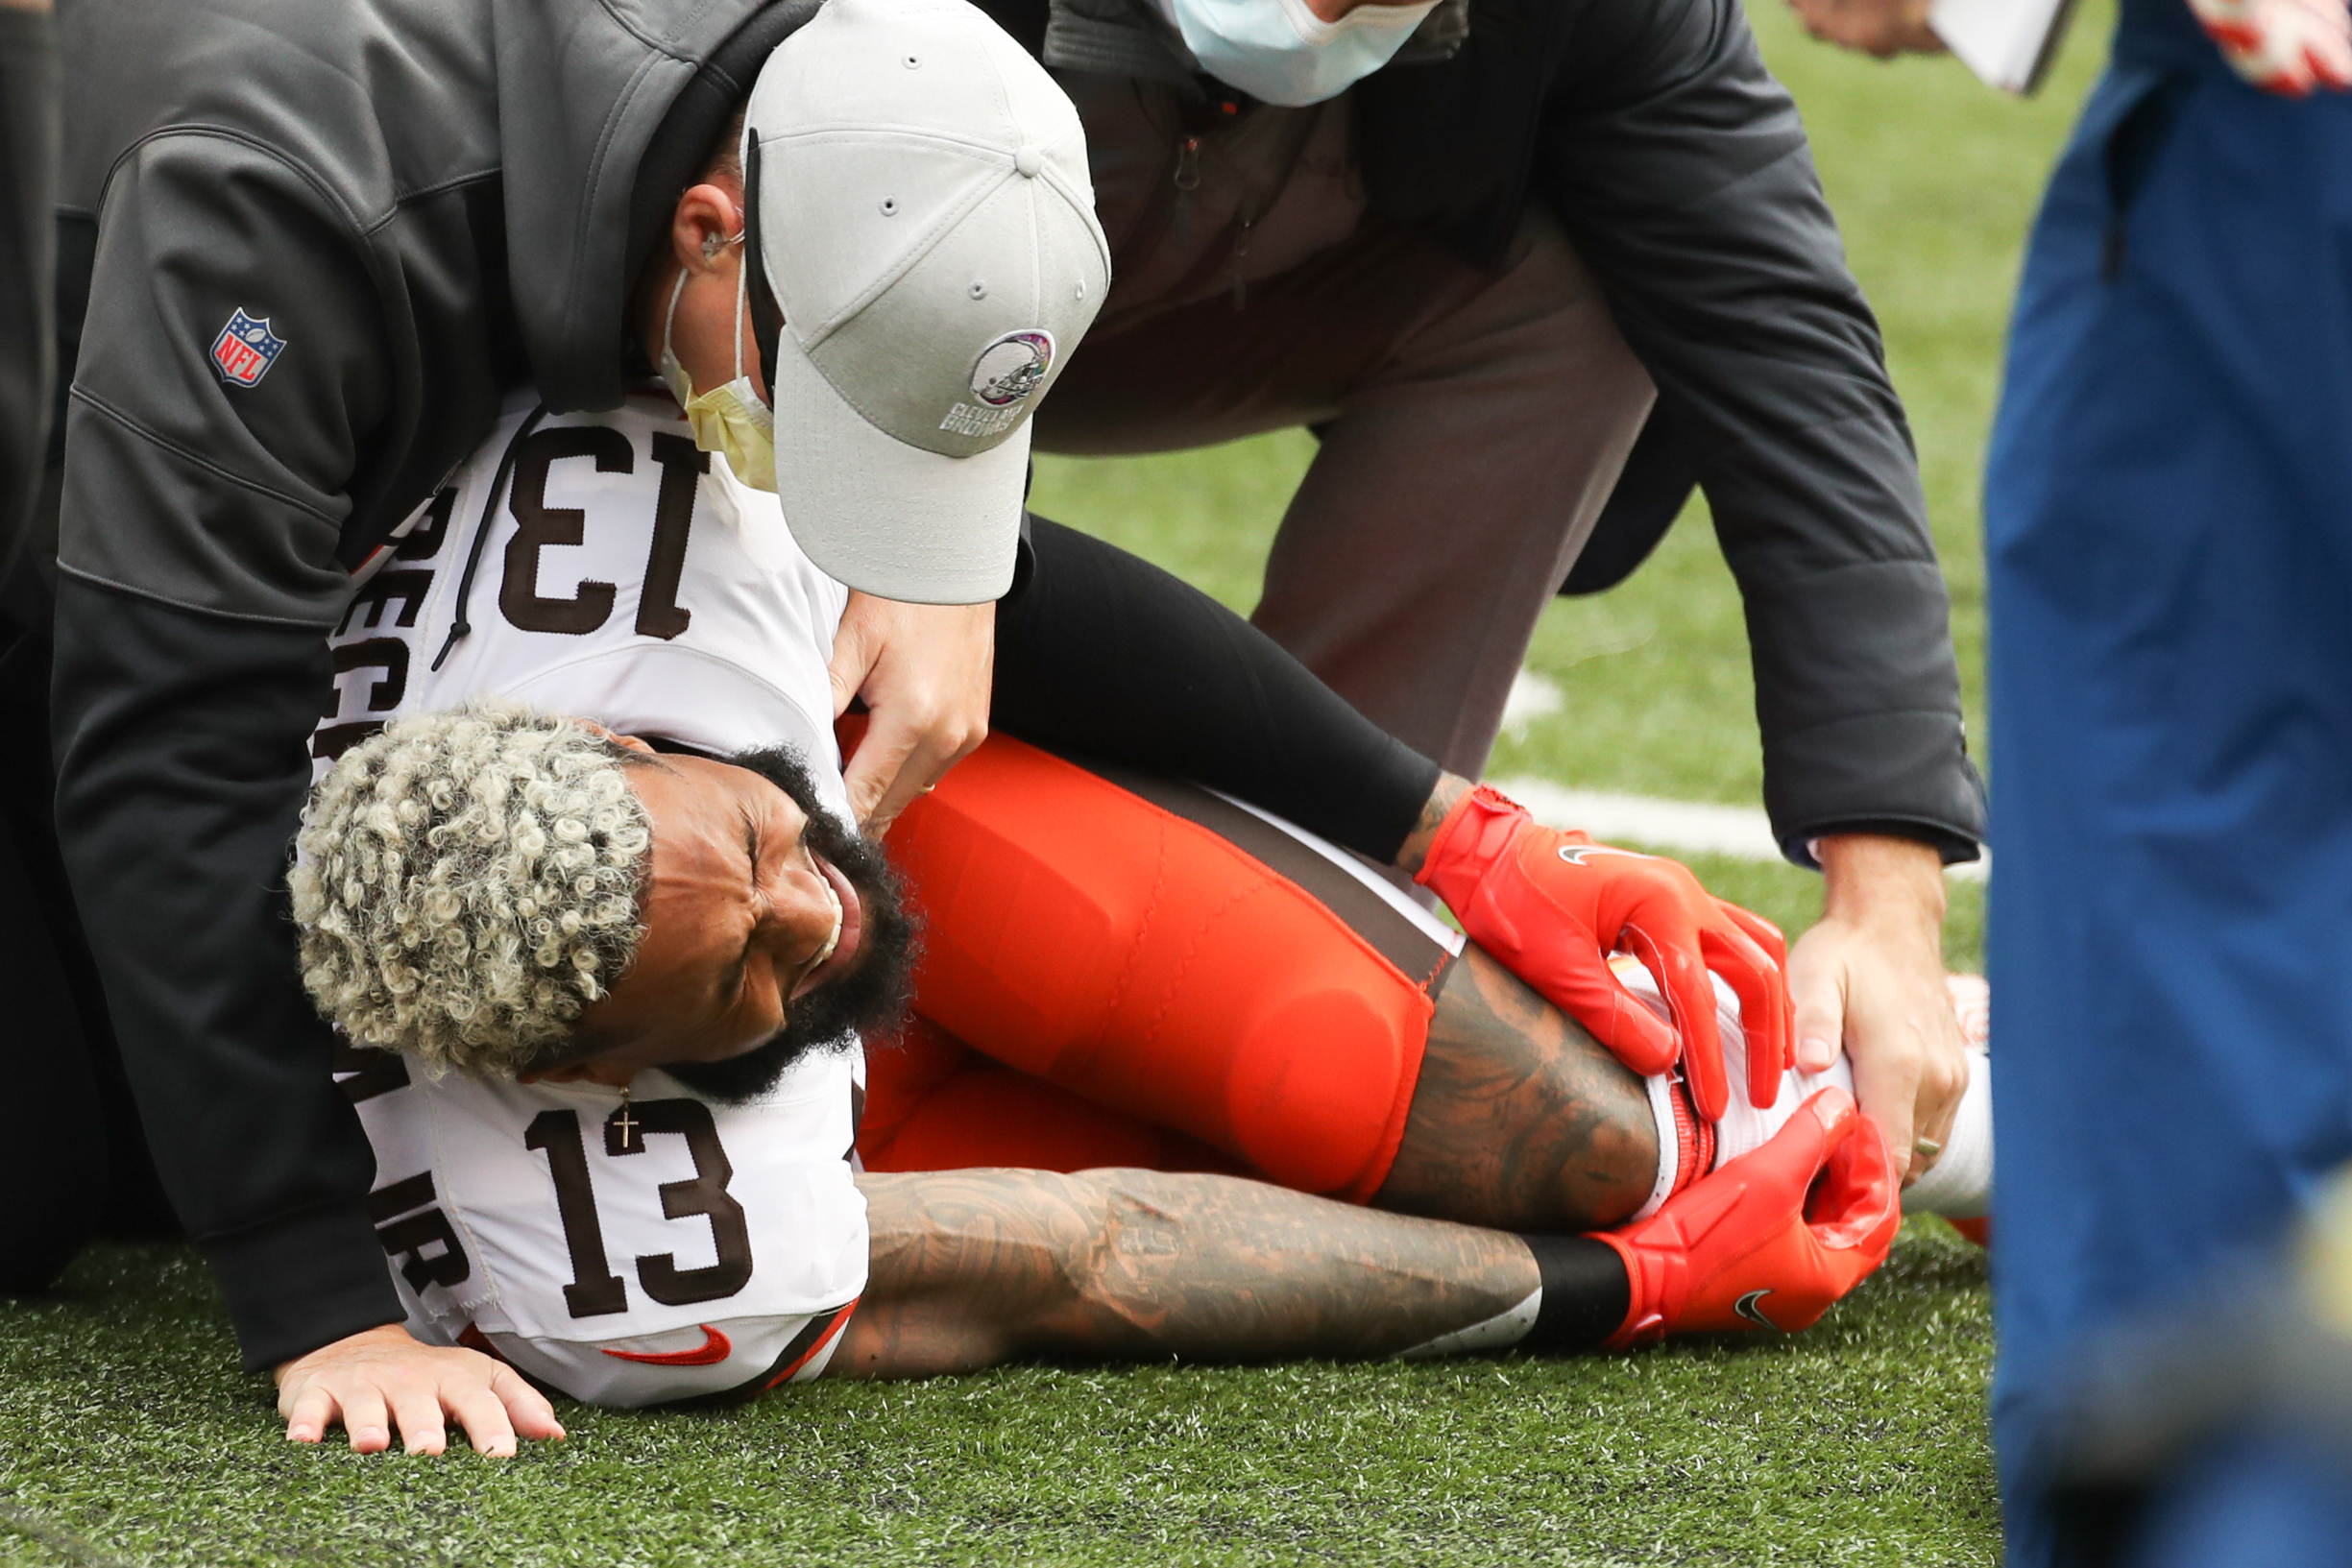 Odell Beckham Jr.'s time with the Cleveland Browns may be over. A torn ACL will end Beckham's season early and is possibly a sad end to his Browns tenure.